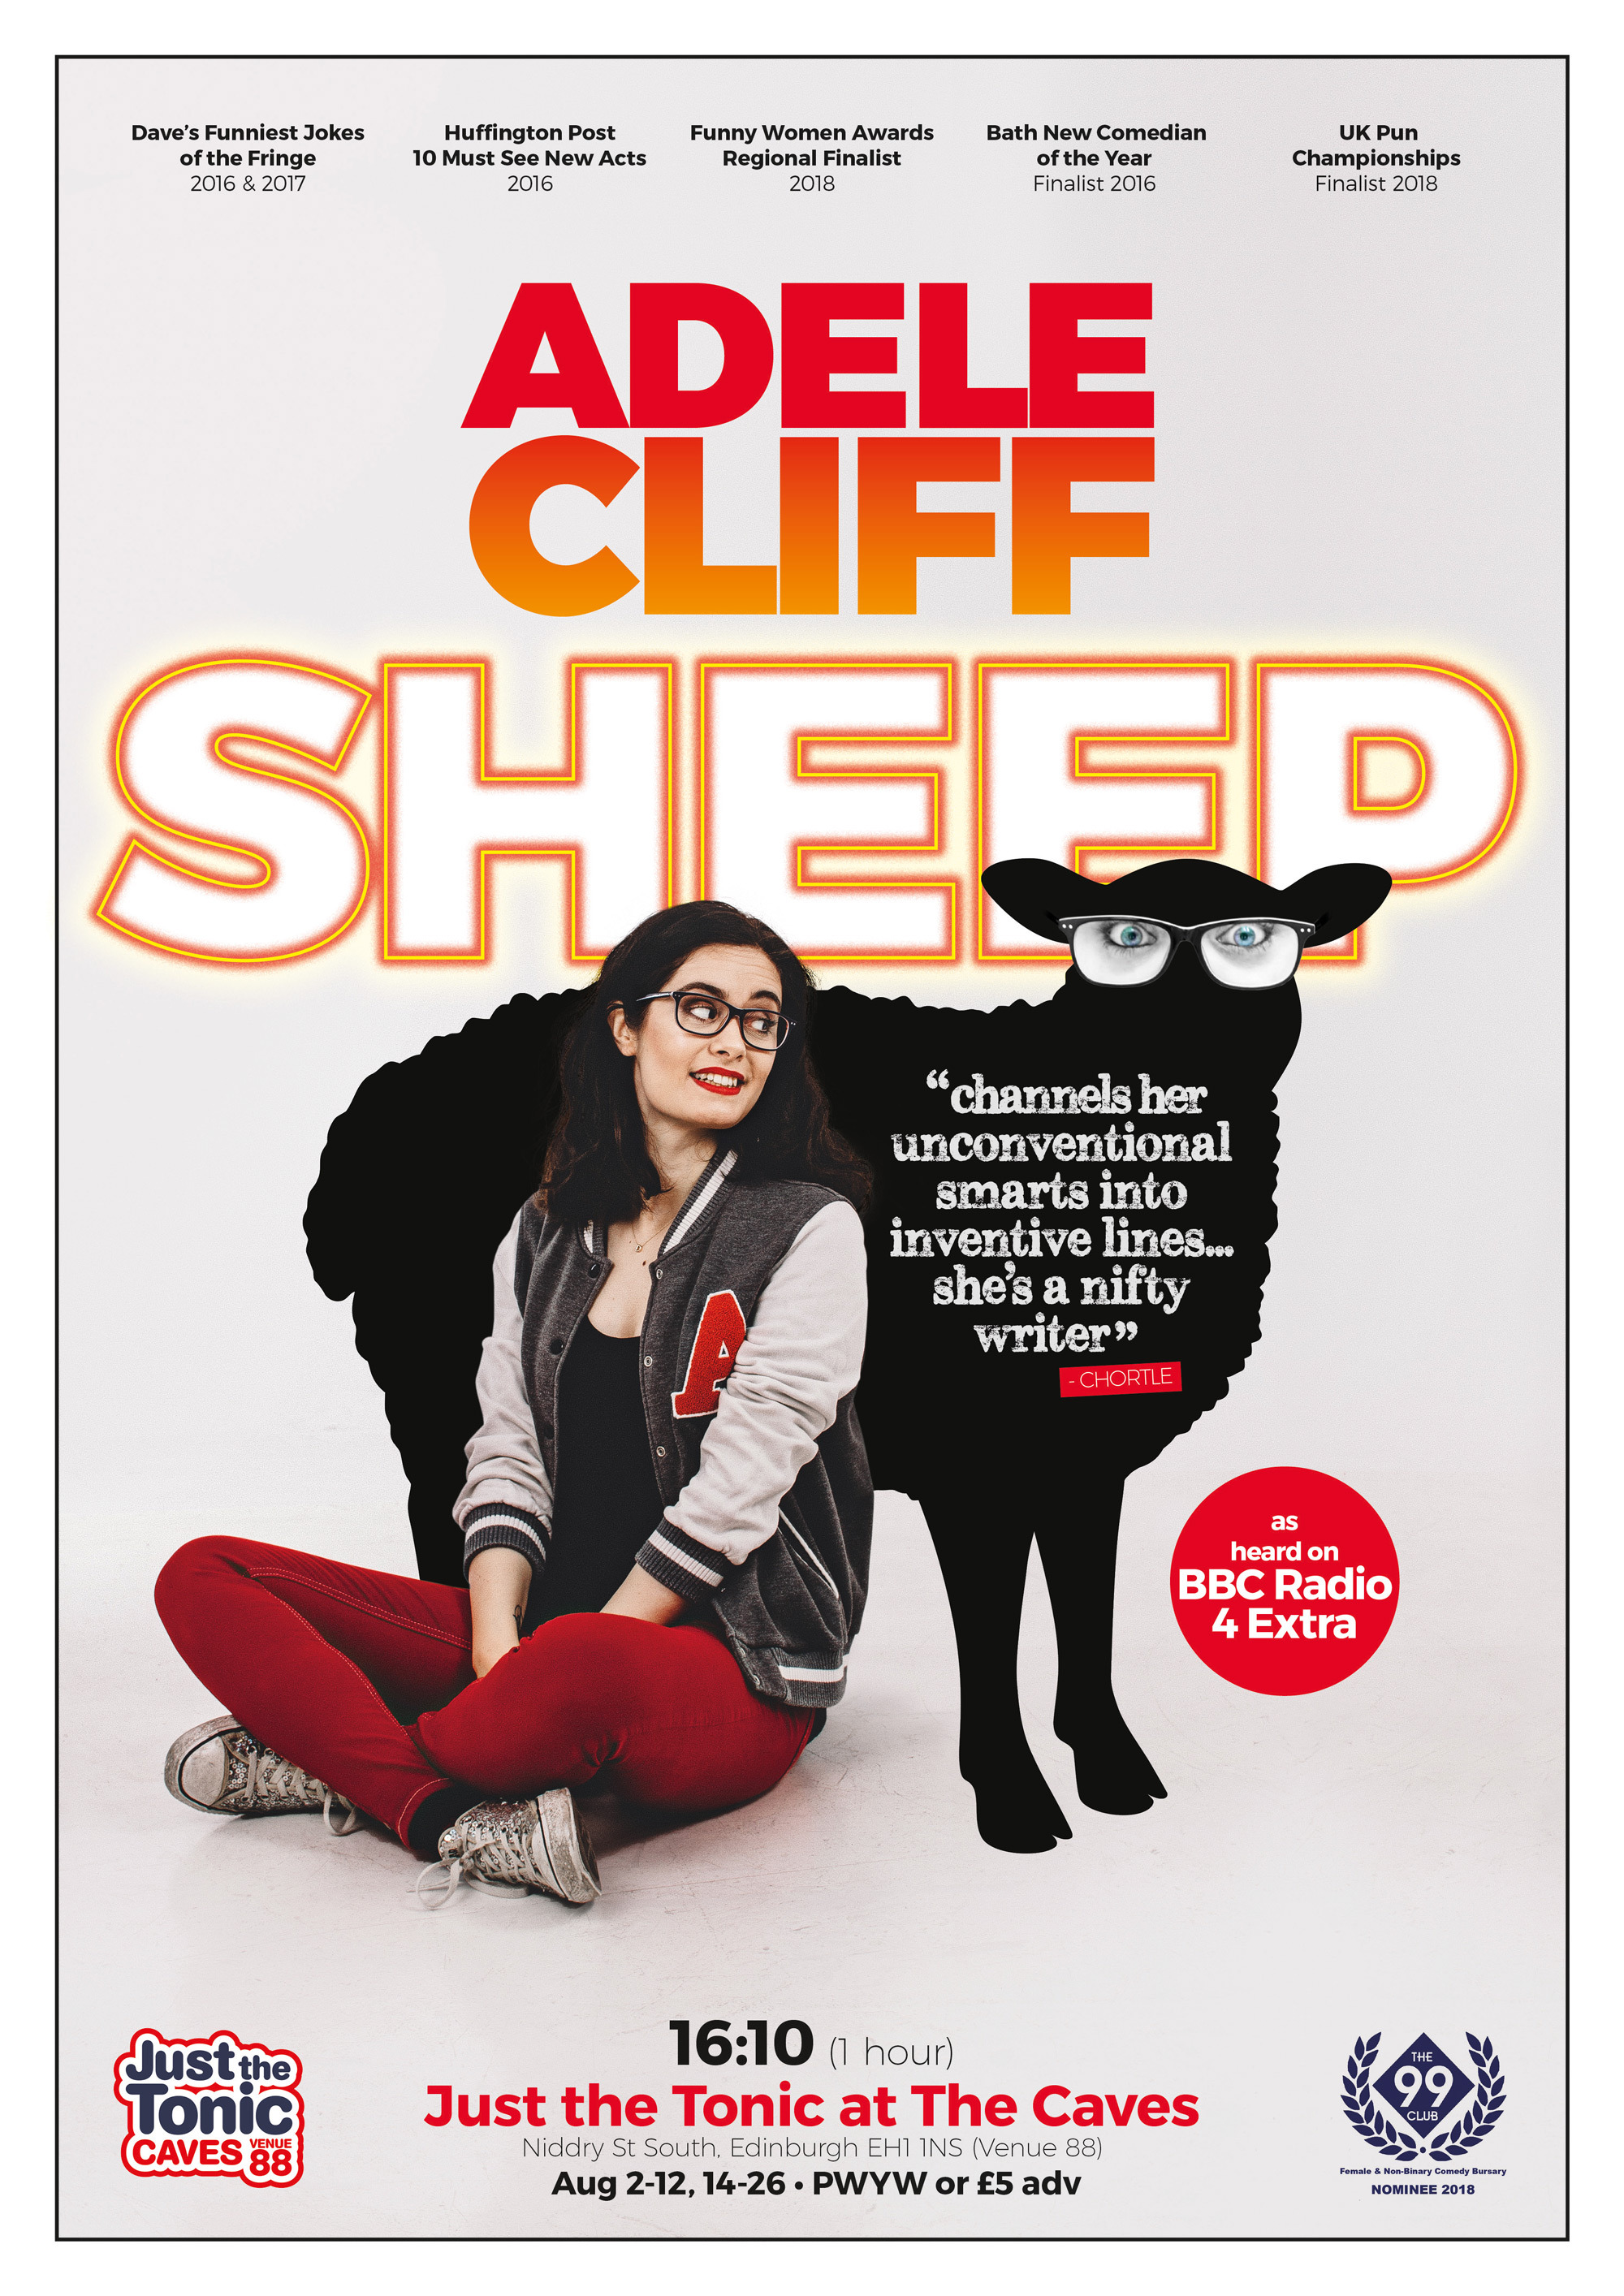 The poster for Adele Cliff: Sheep